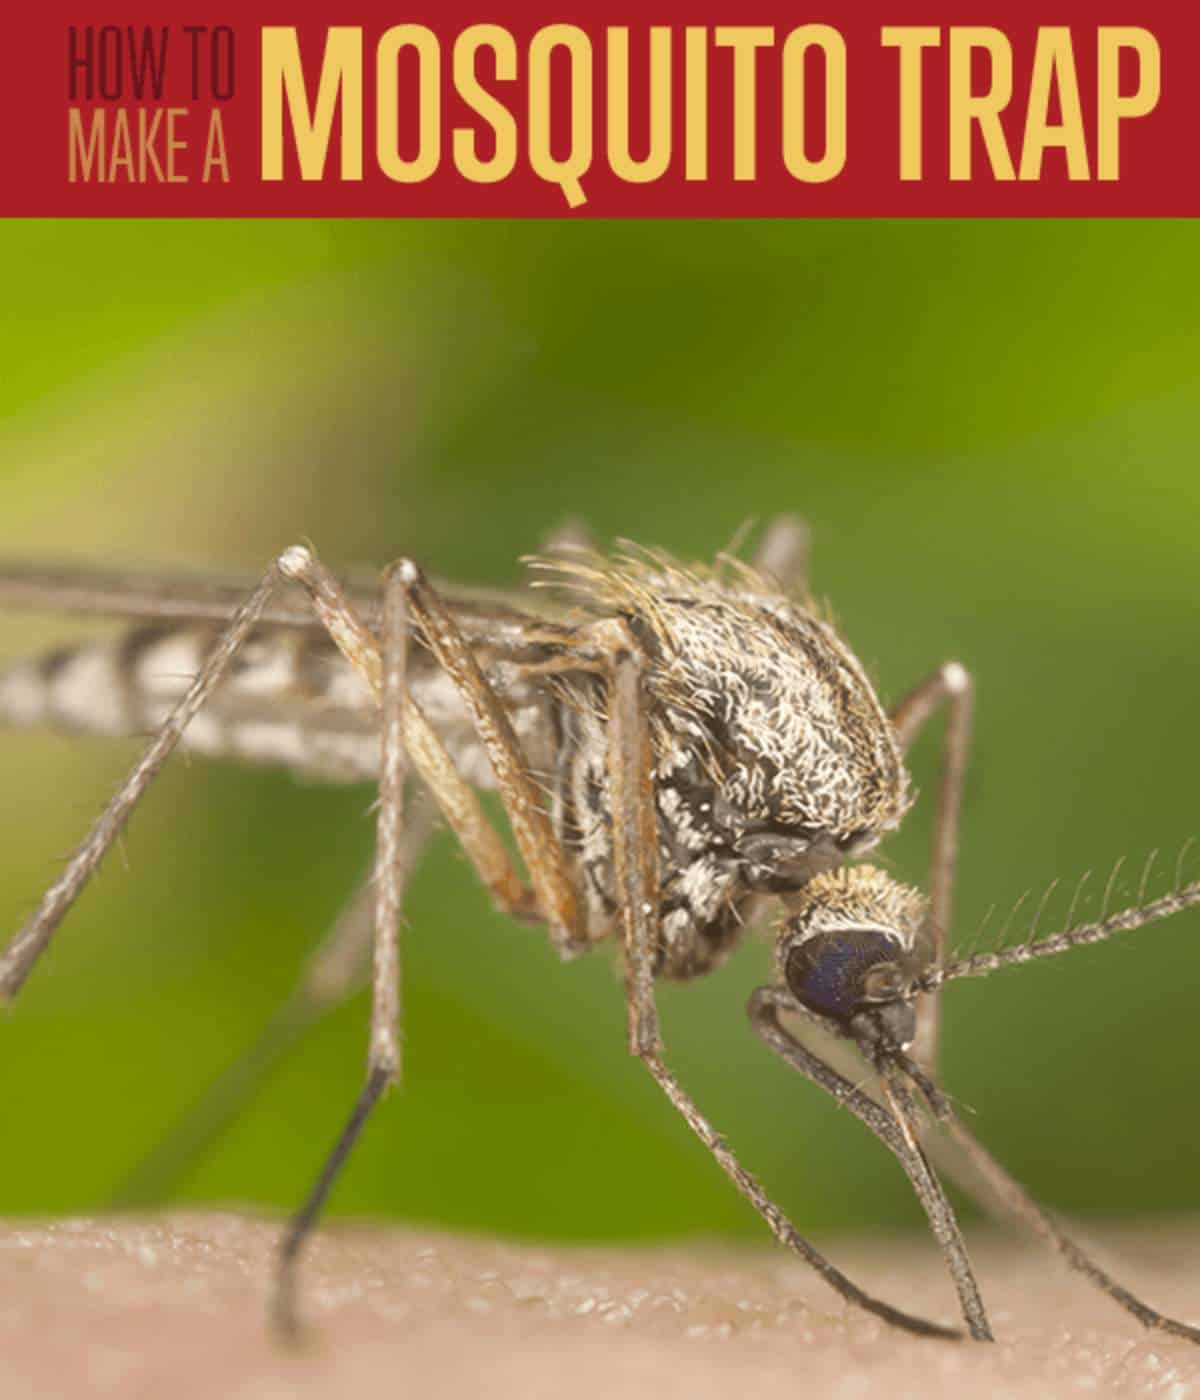 how to make a mosquito trap | Homemade Mosquito Trap Instructions | Summer-Ready Your Preps | homemade mosquito trap | homemade mosquito repellent for yard